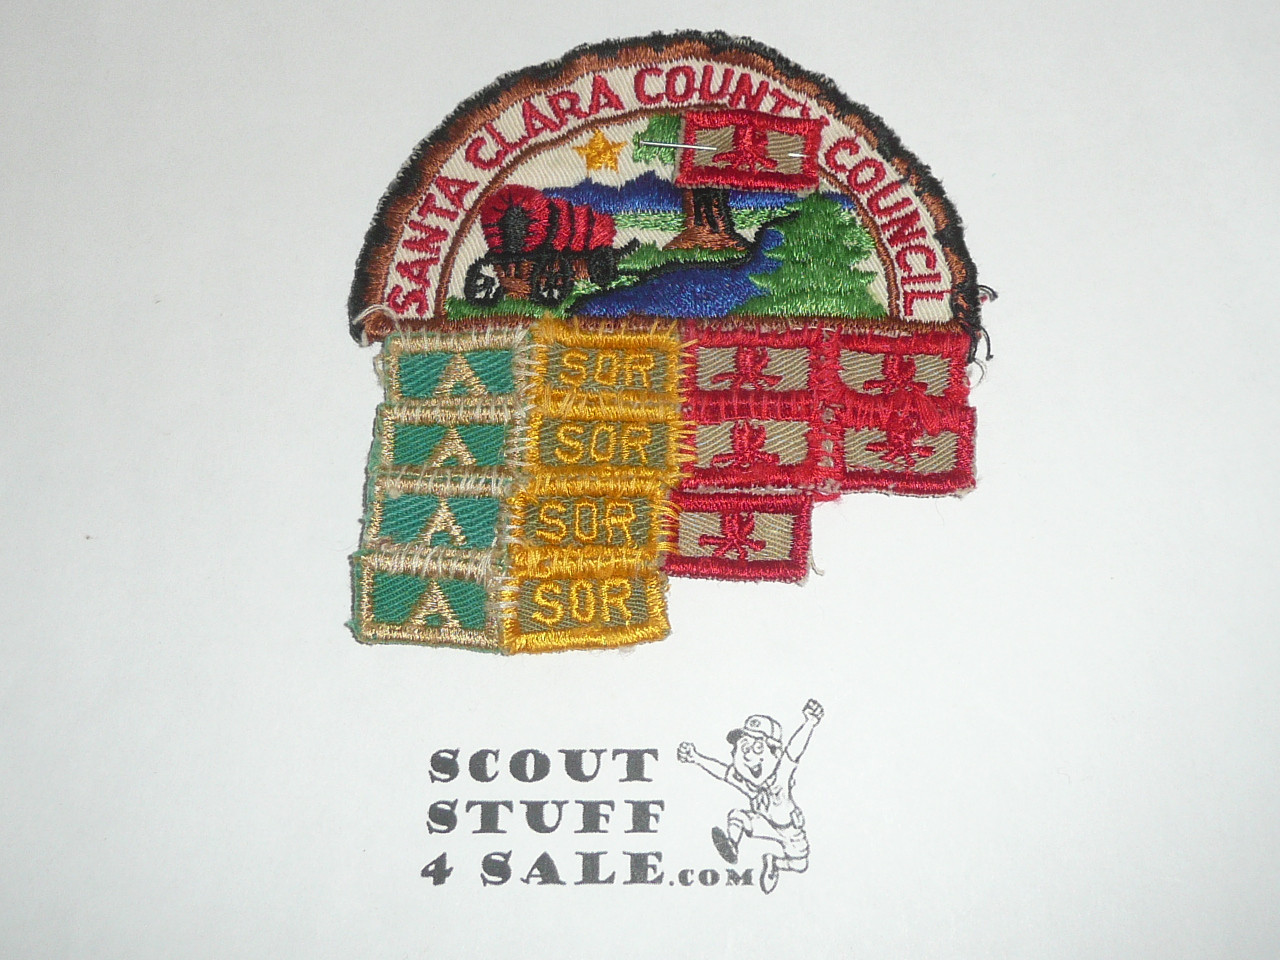 Santa Clara County Council Patch (CP) with many activity segments, lite use